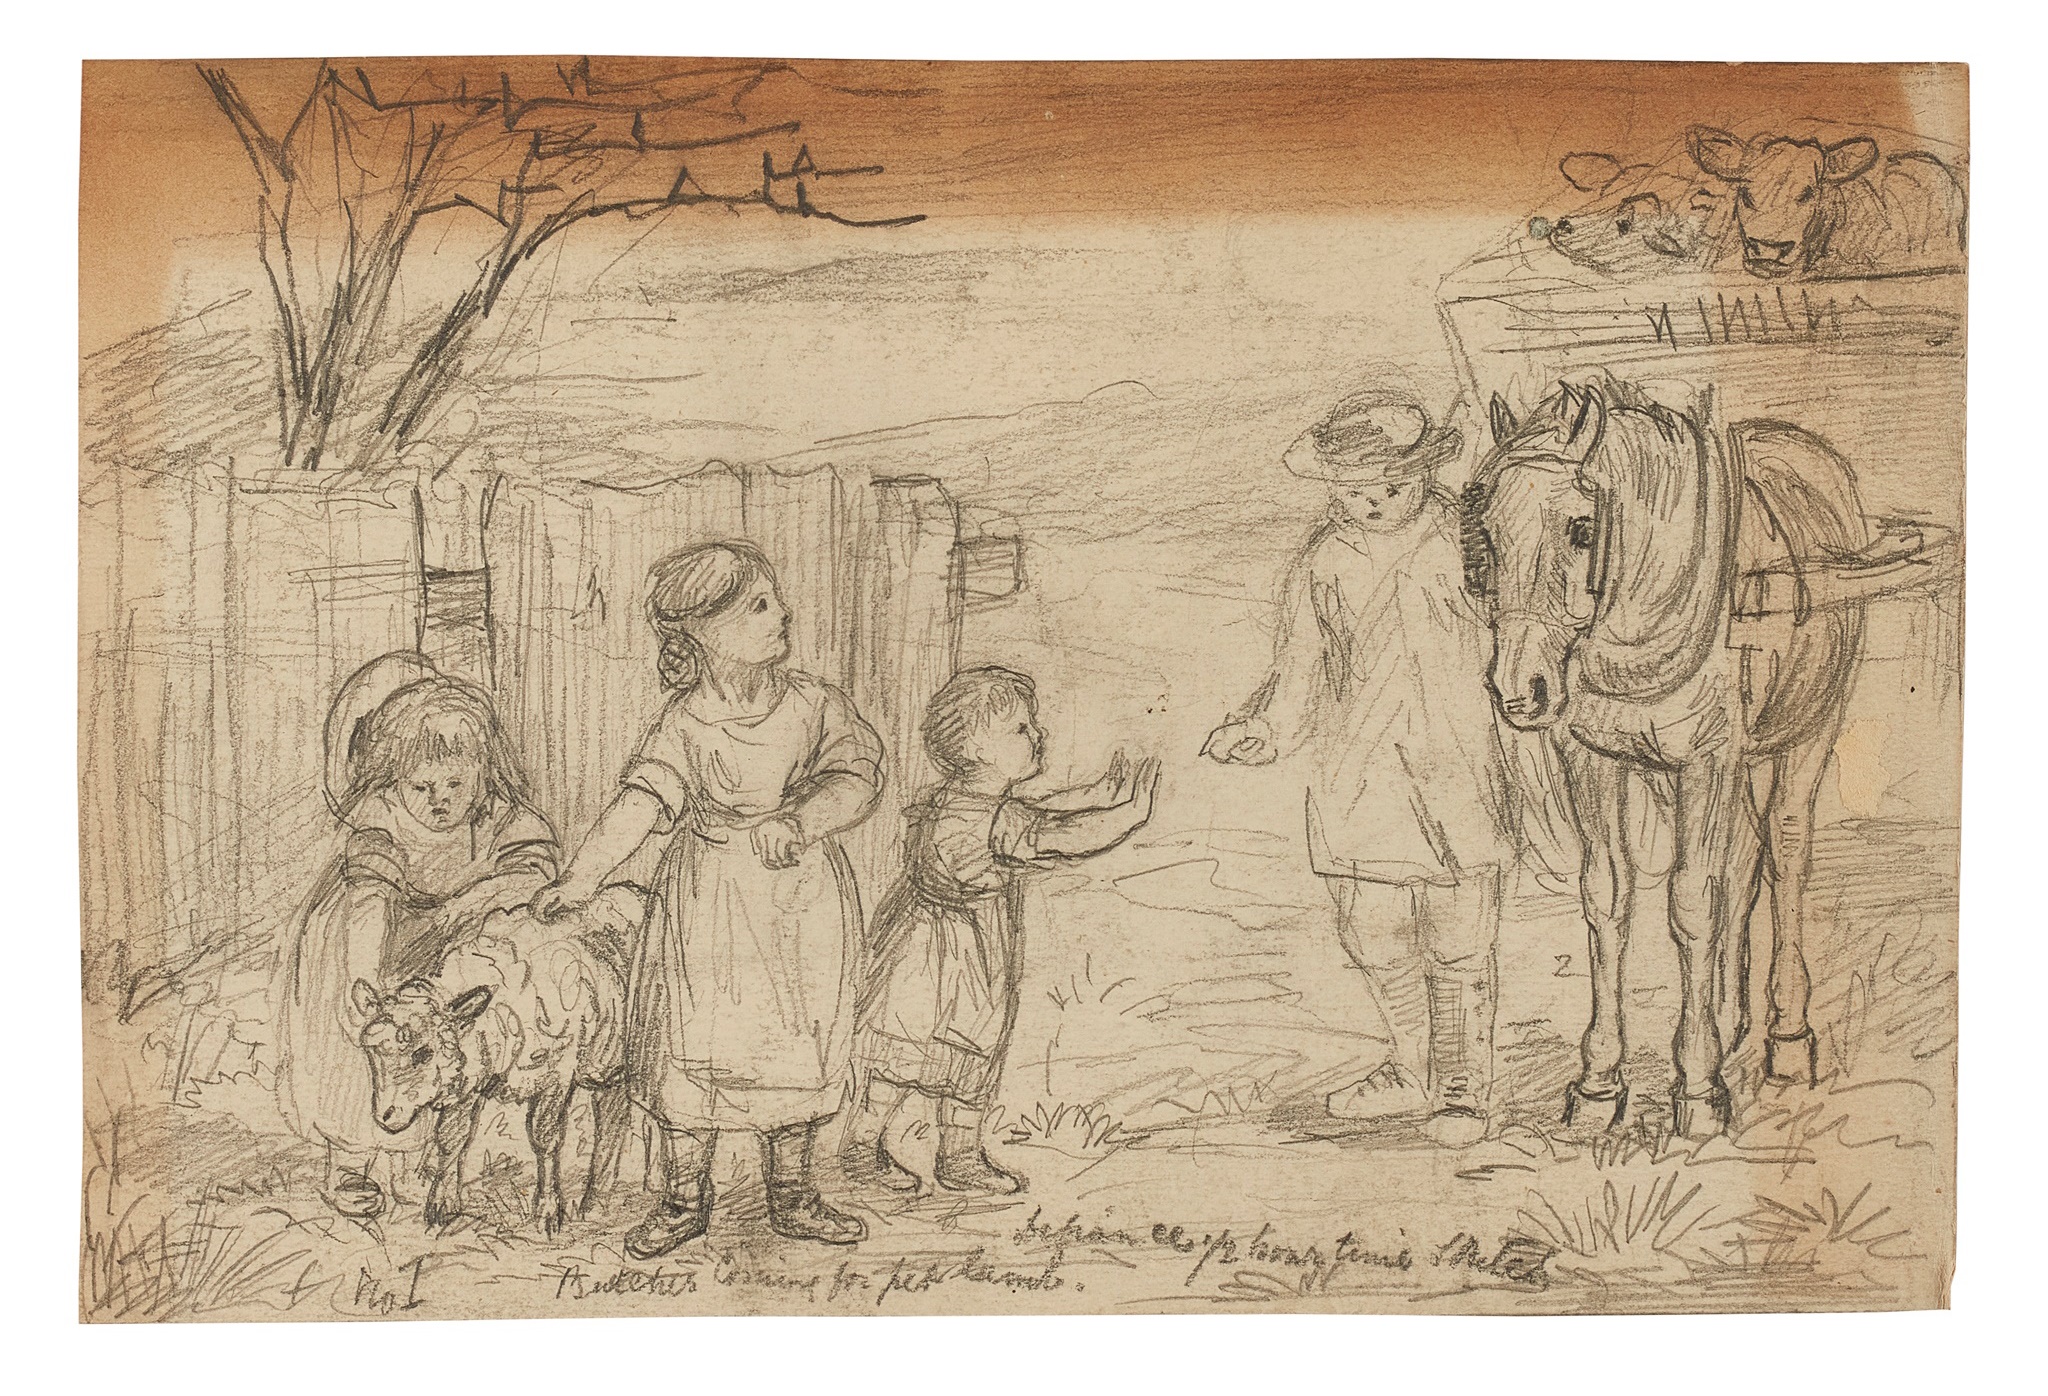 HANNAH BARLOW (1851-1916) ‘DEFIANCE- BUTCHER COMING FOR HER LAMB’, HALF-HOUR TIME SKETCH, CIRCA 1870